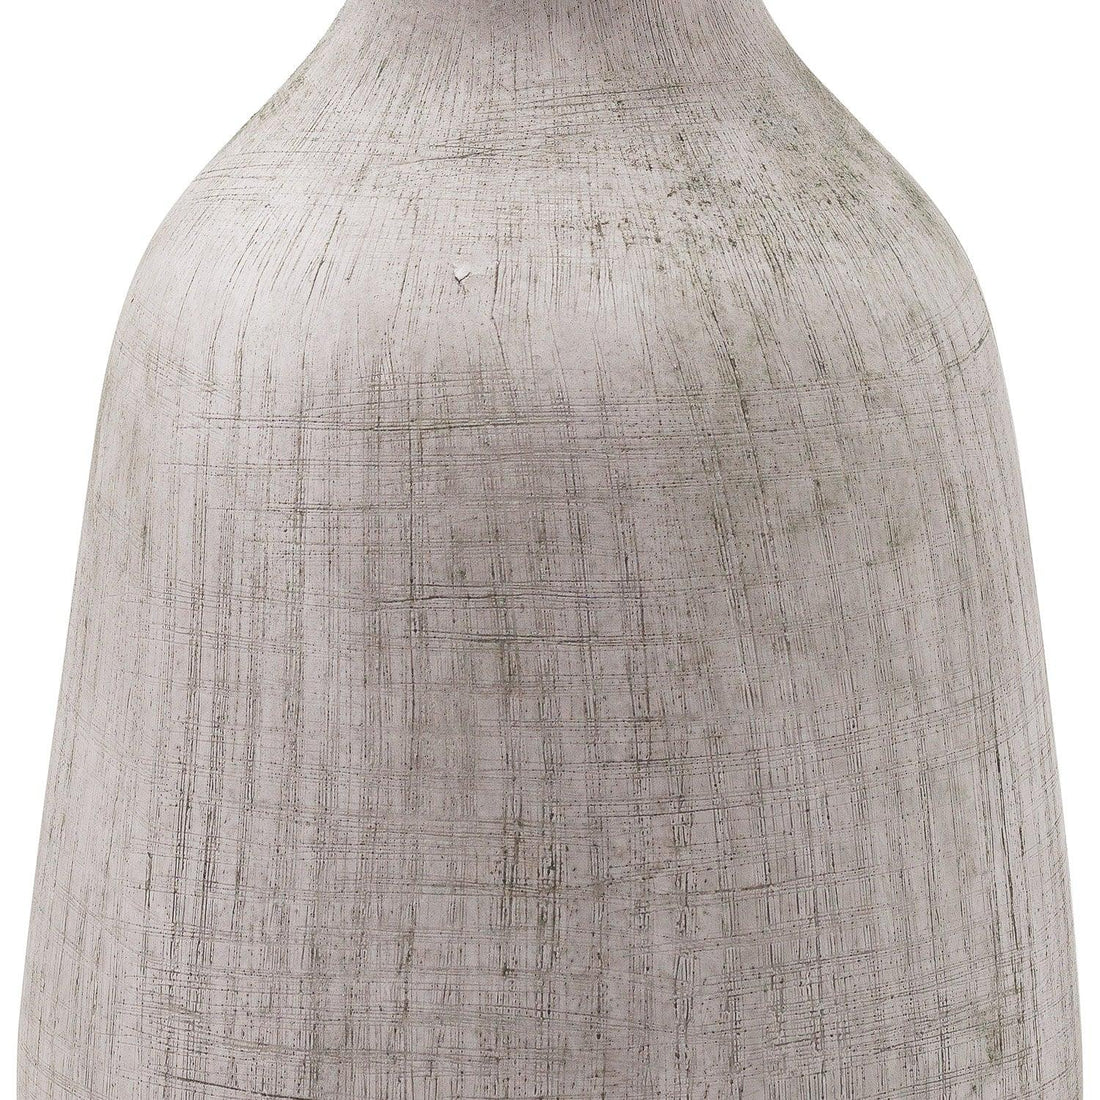 Bloomville Ople Stone Vase - £59.95 - Gifts & Accessories > Vases > Black Friday Vases and Planters 